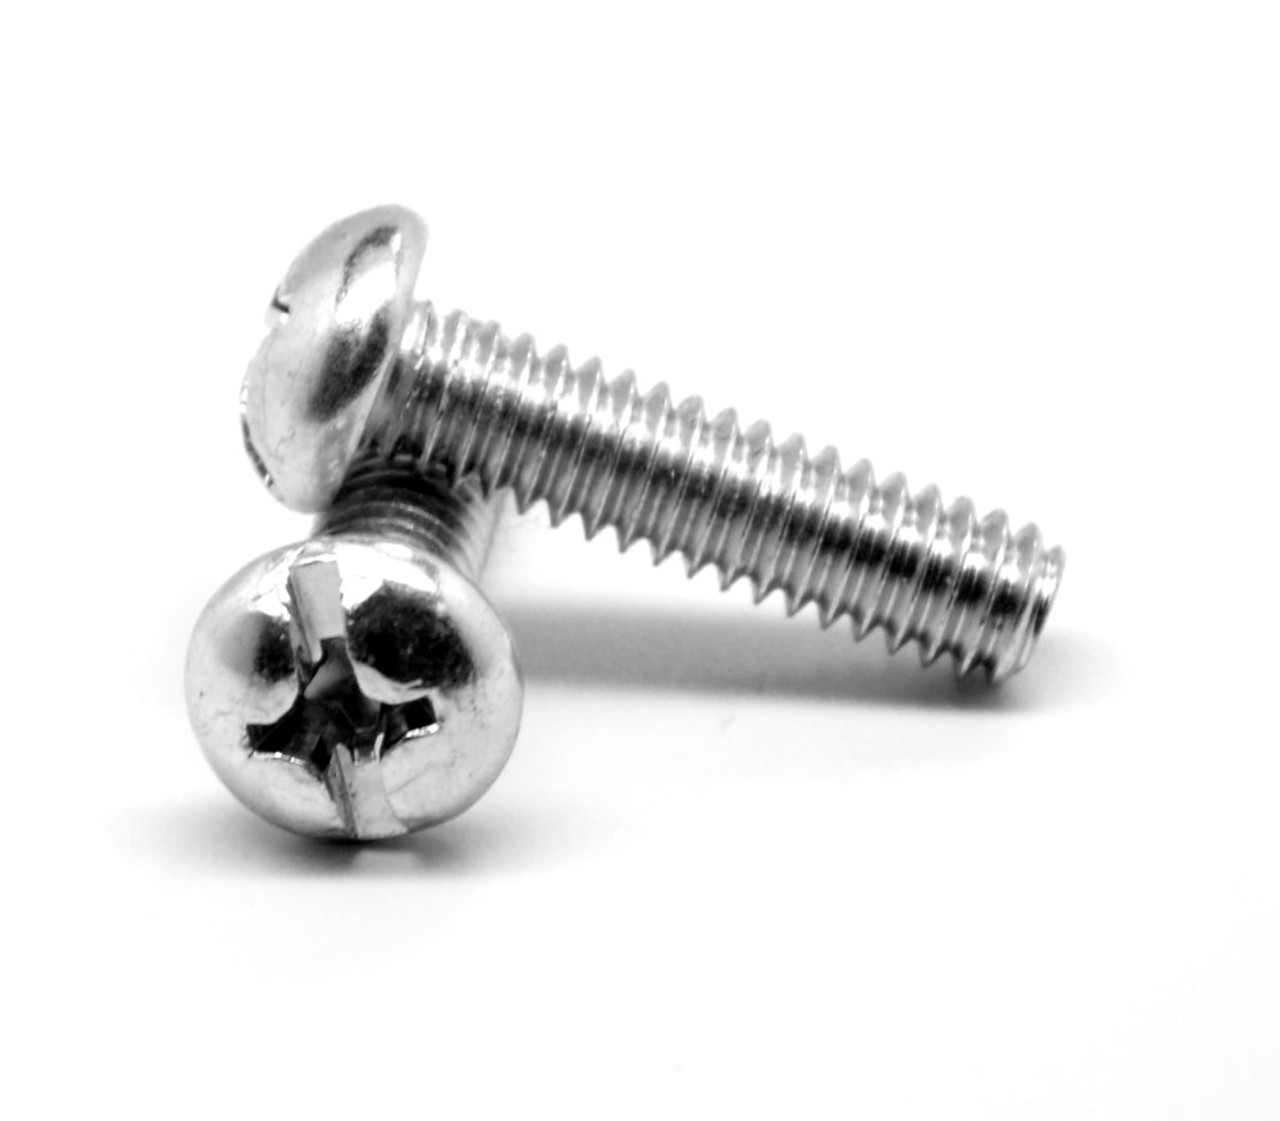 #4-40 x 3/16" (FT) Coarse Thread Machine Screw Combo (Phillips/Slotted) Pan Head Low Carbon Steel Zinc Plated